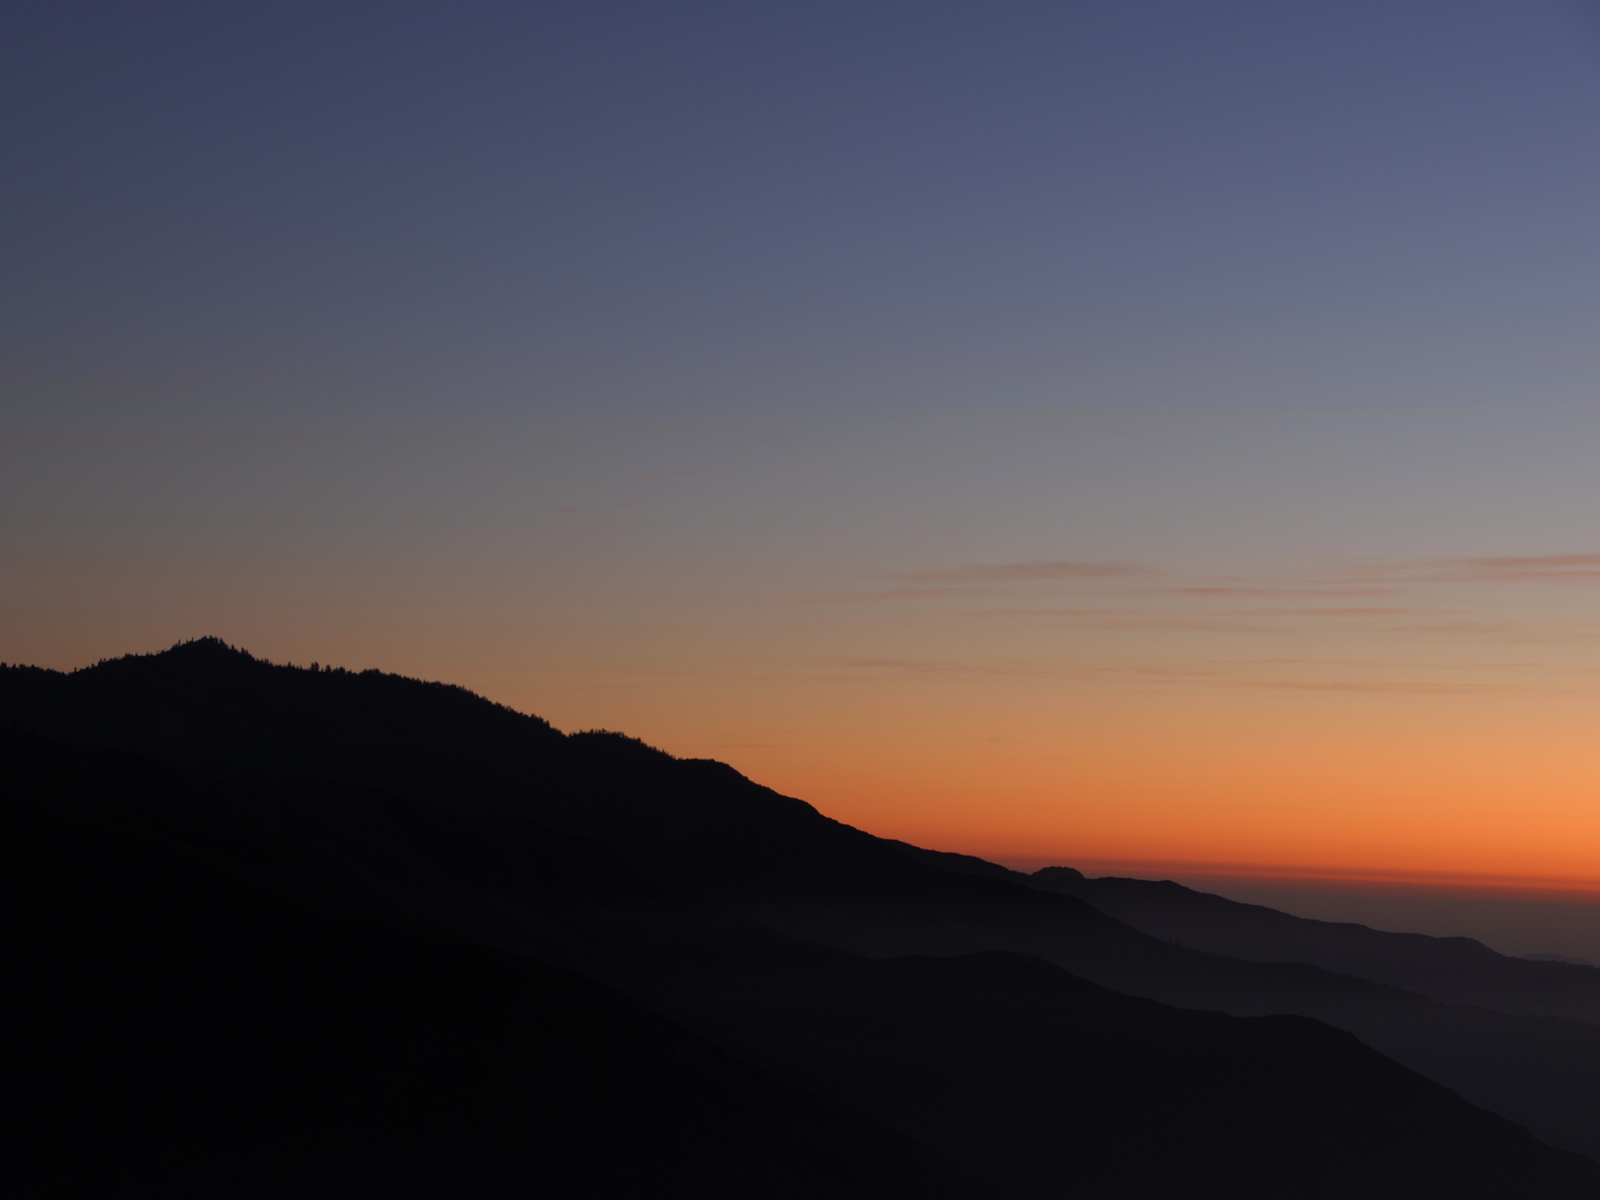 Dusk in sequoia national park (panoramic photo